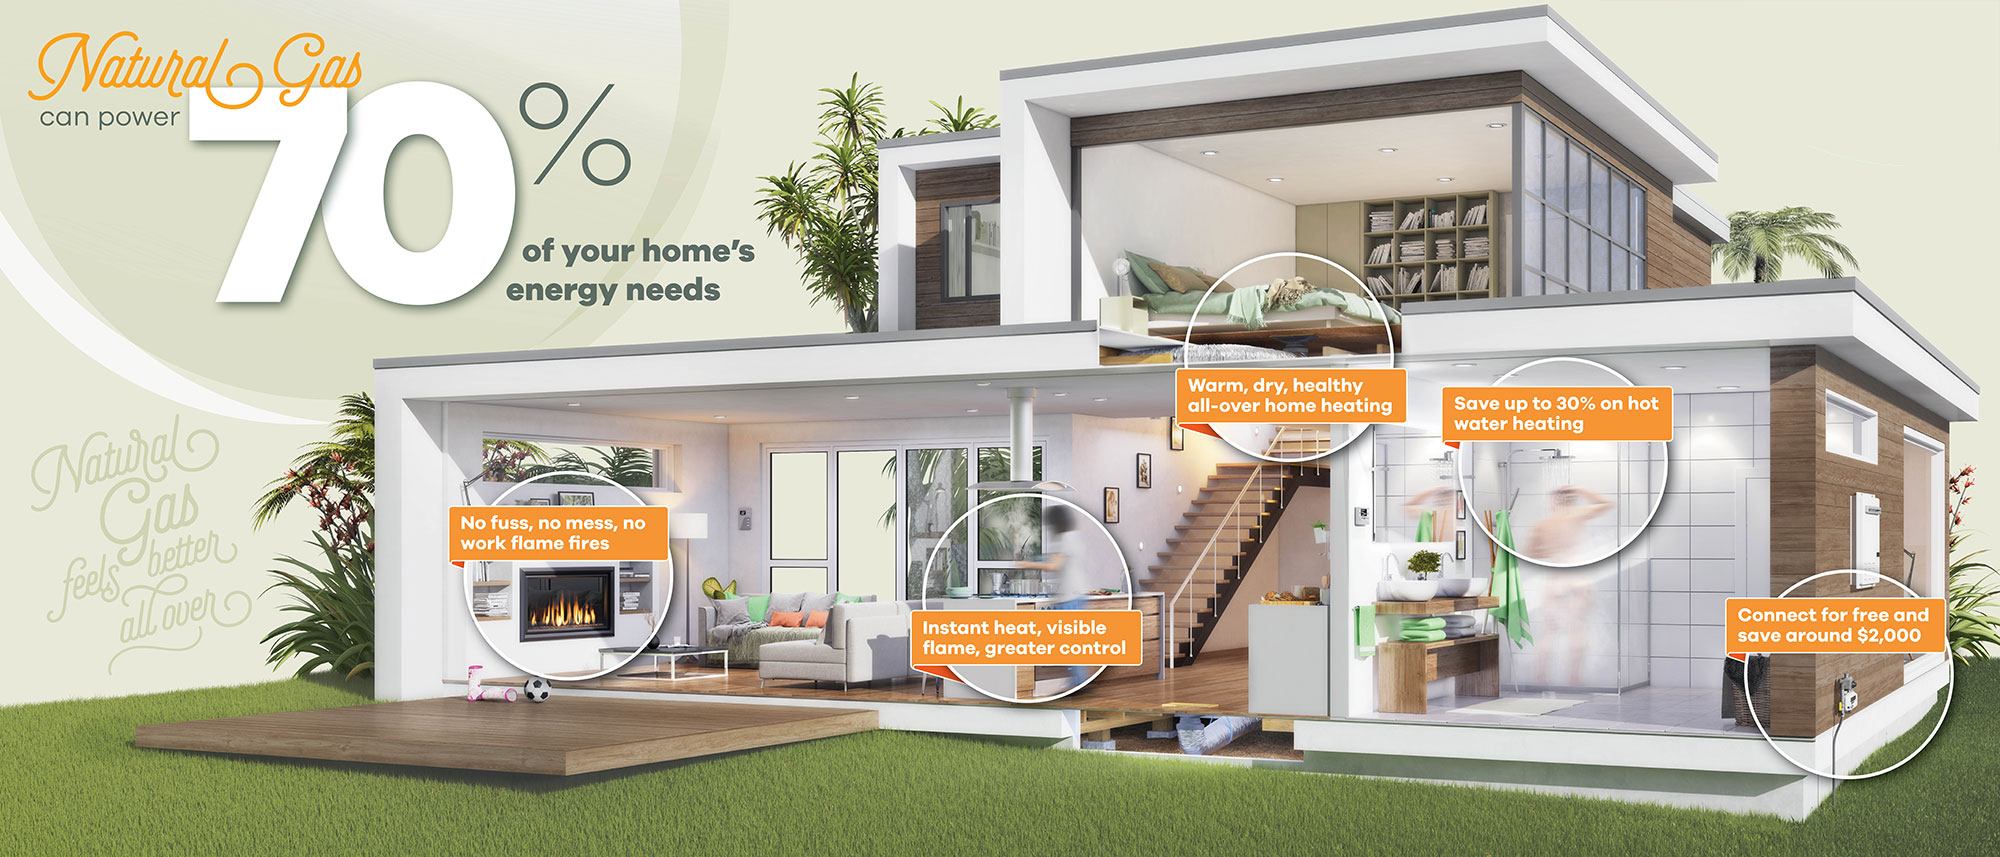 Natural gas can power 70% of your home's energy needs